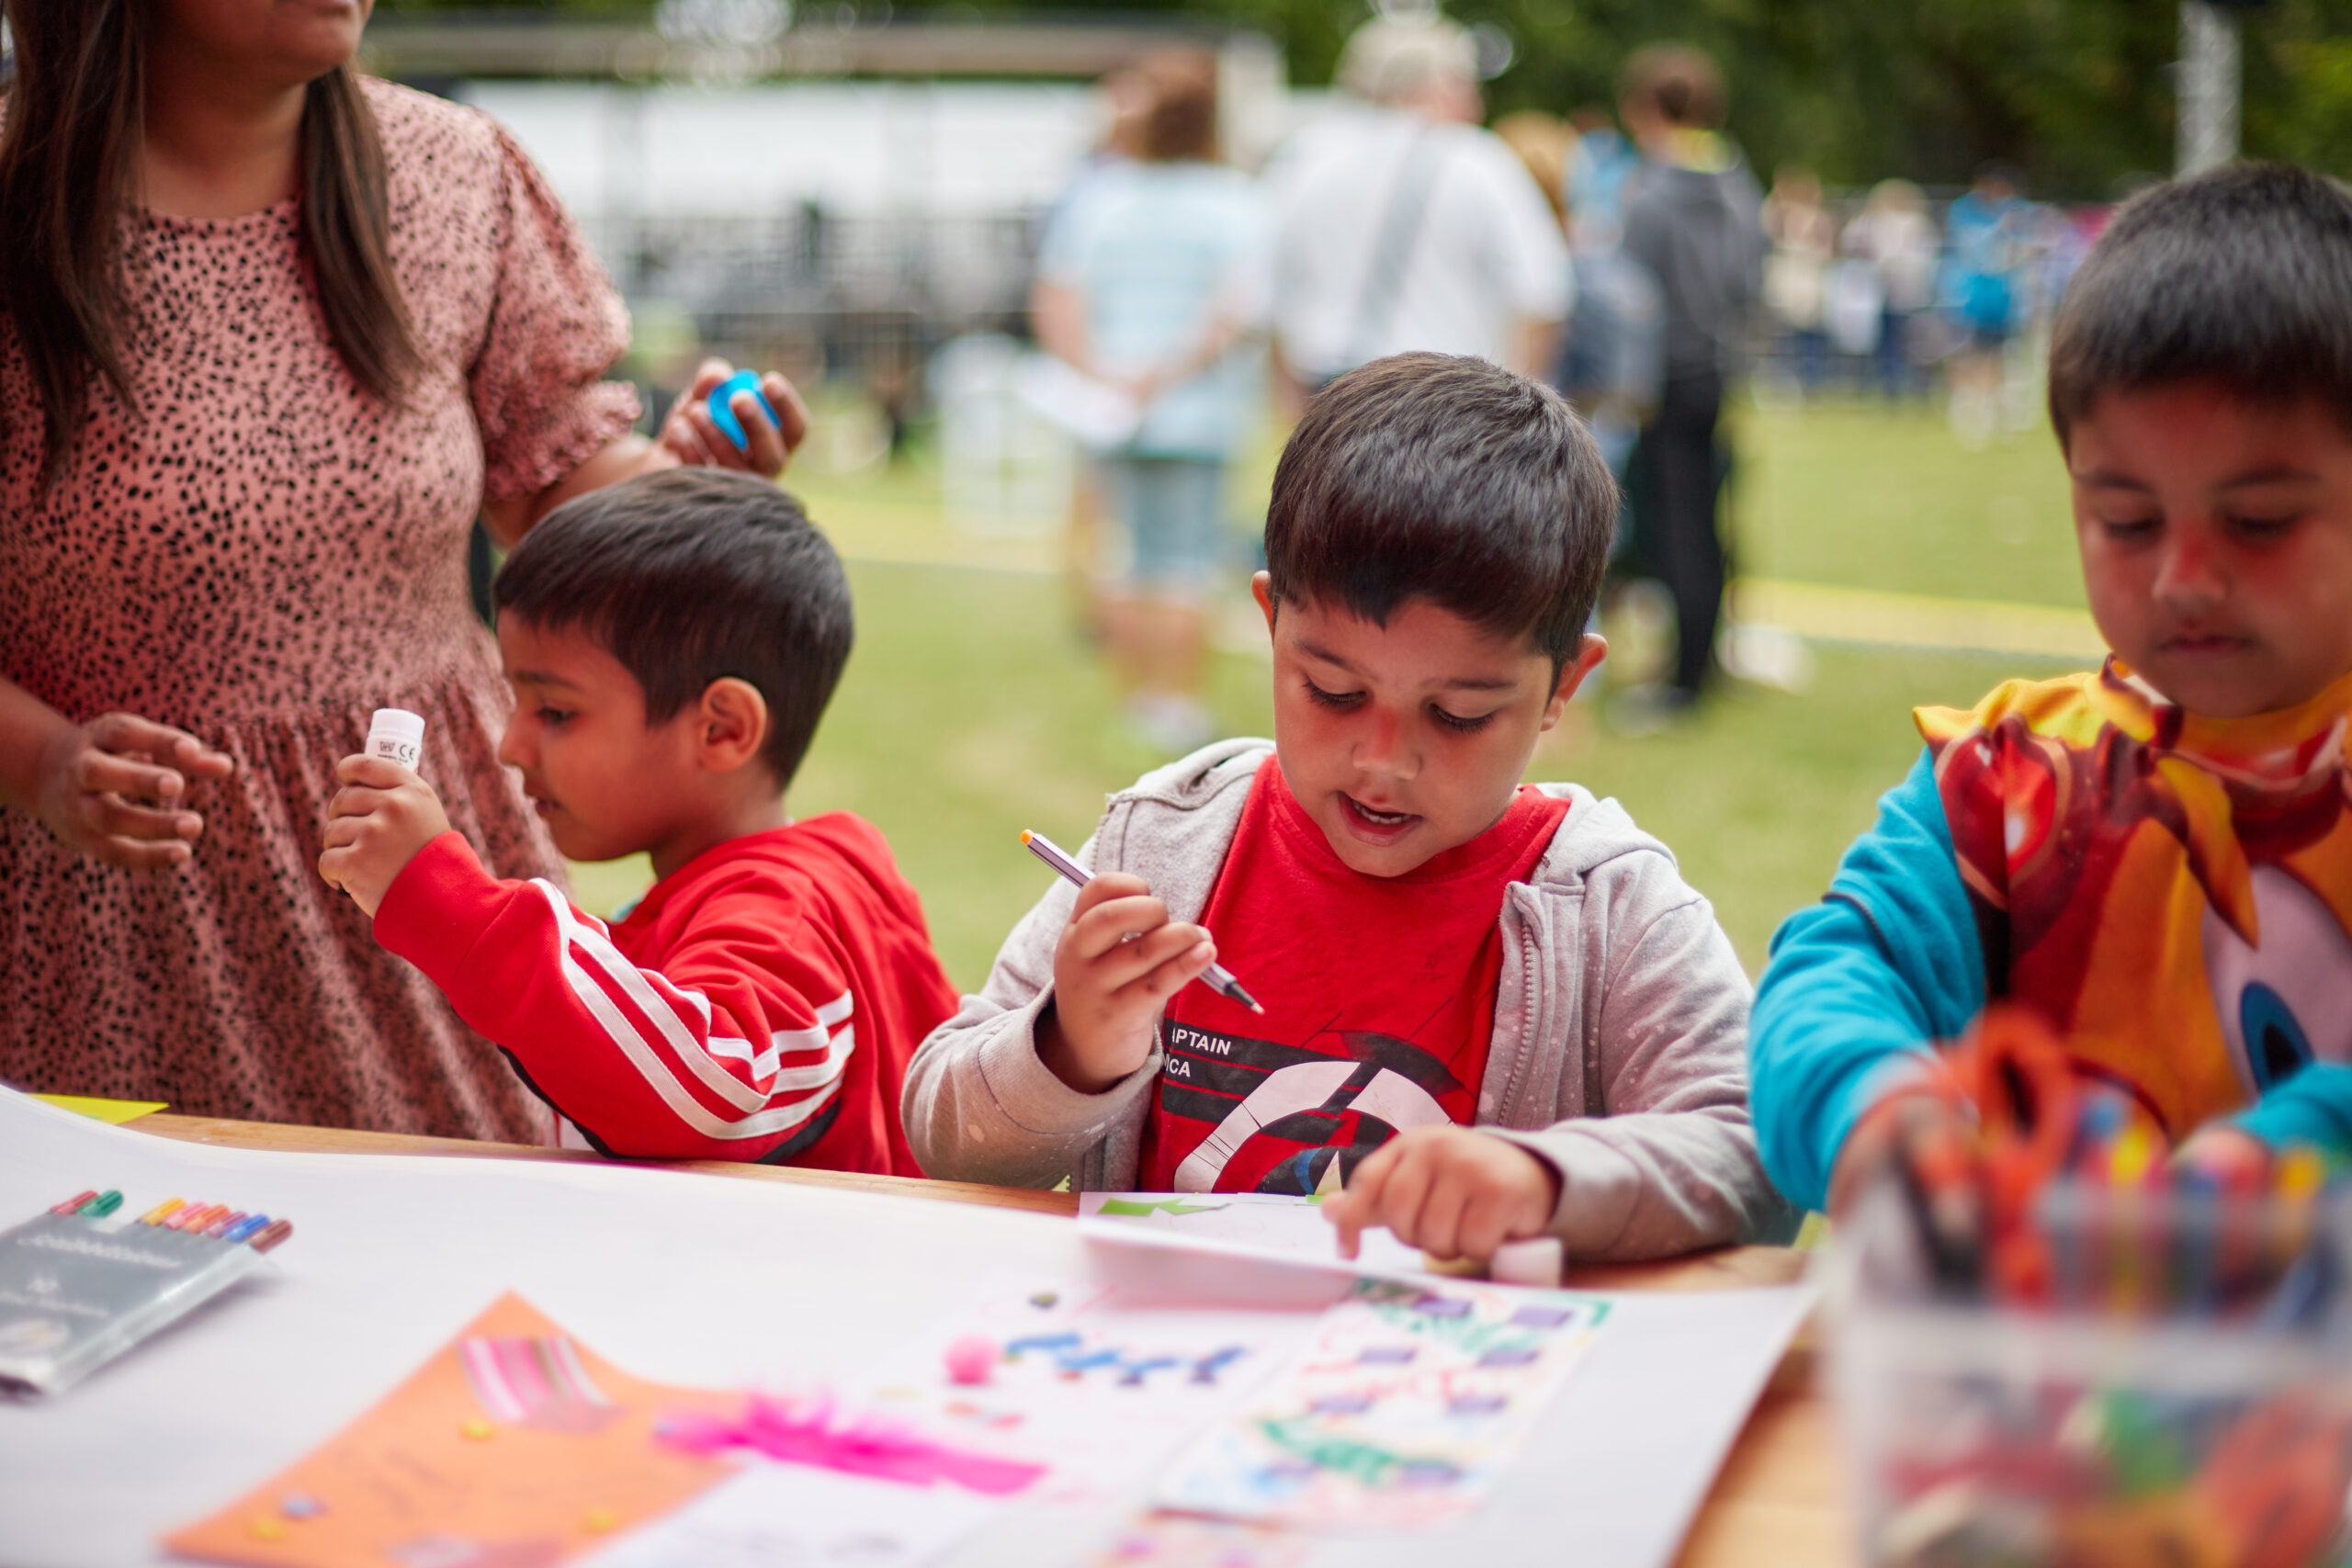 Photograph of children outside on a stall, drawing and playing.